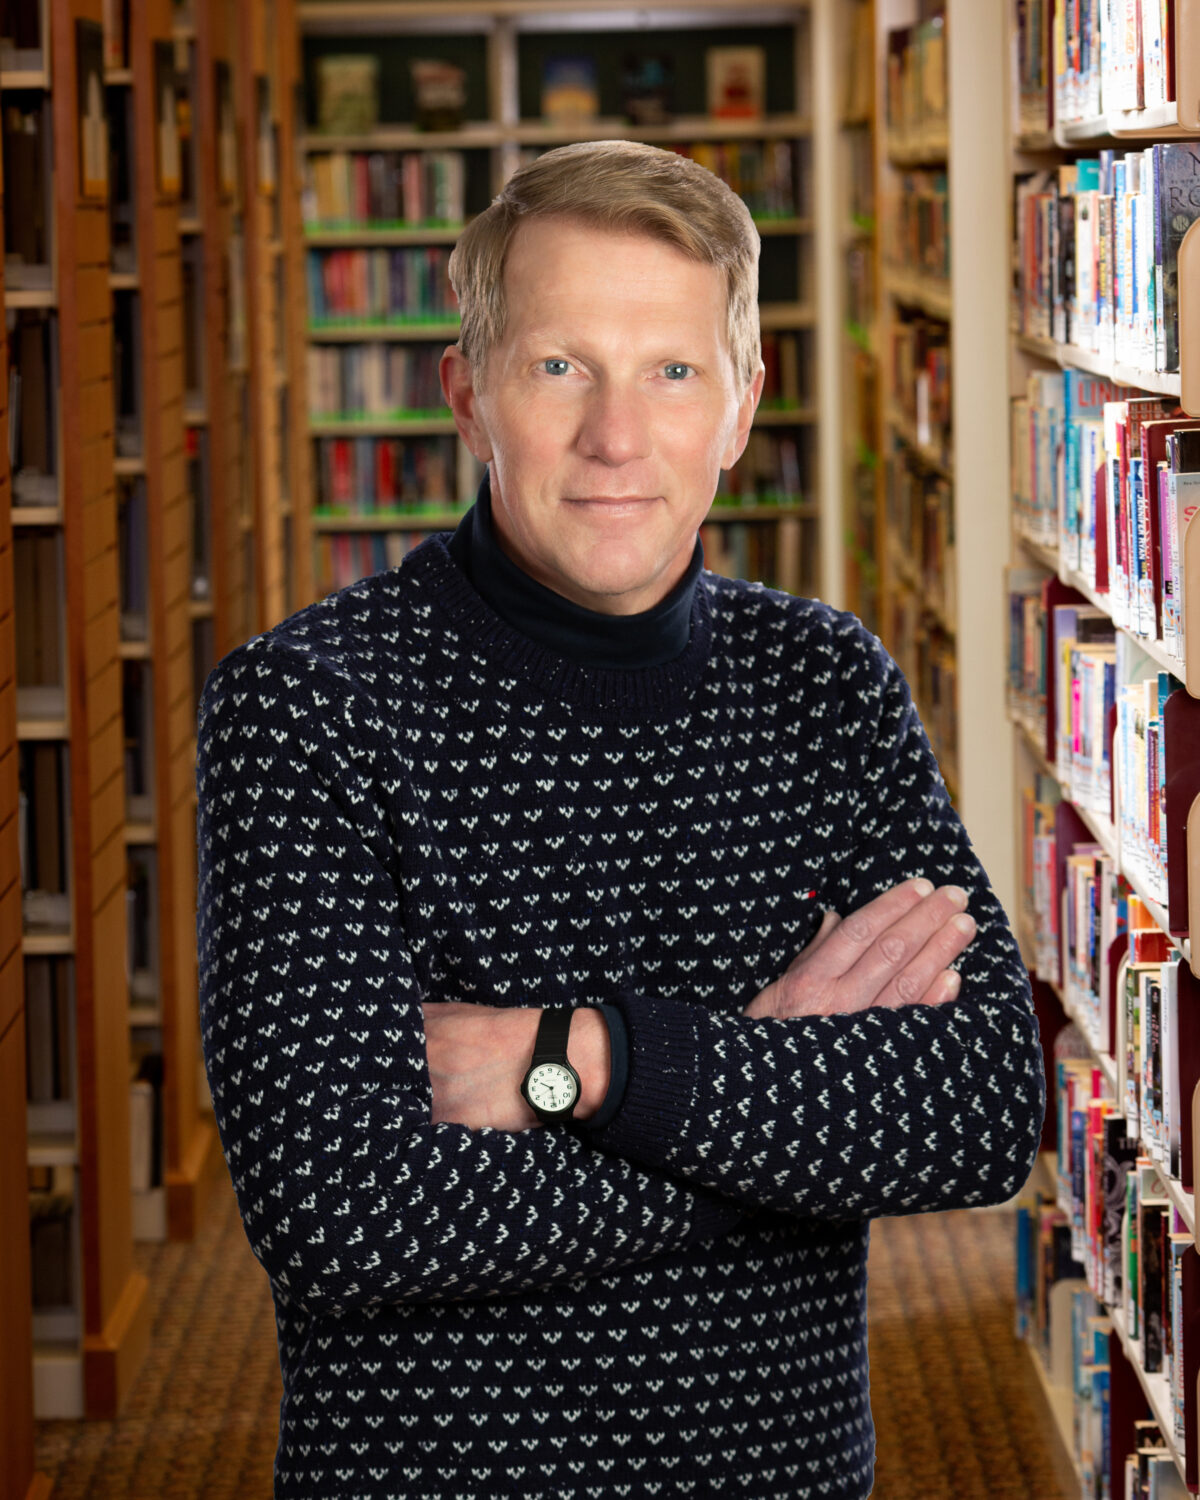 man with blue sweater crosses arms while standing in front of library shelves